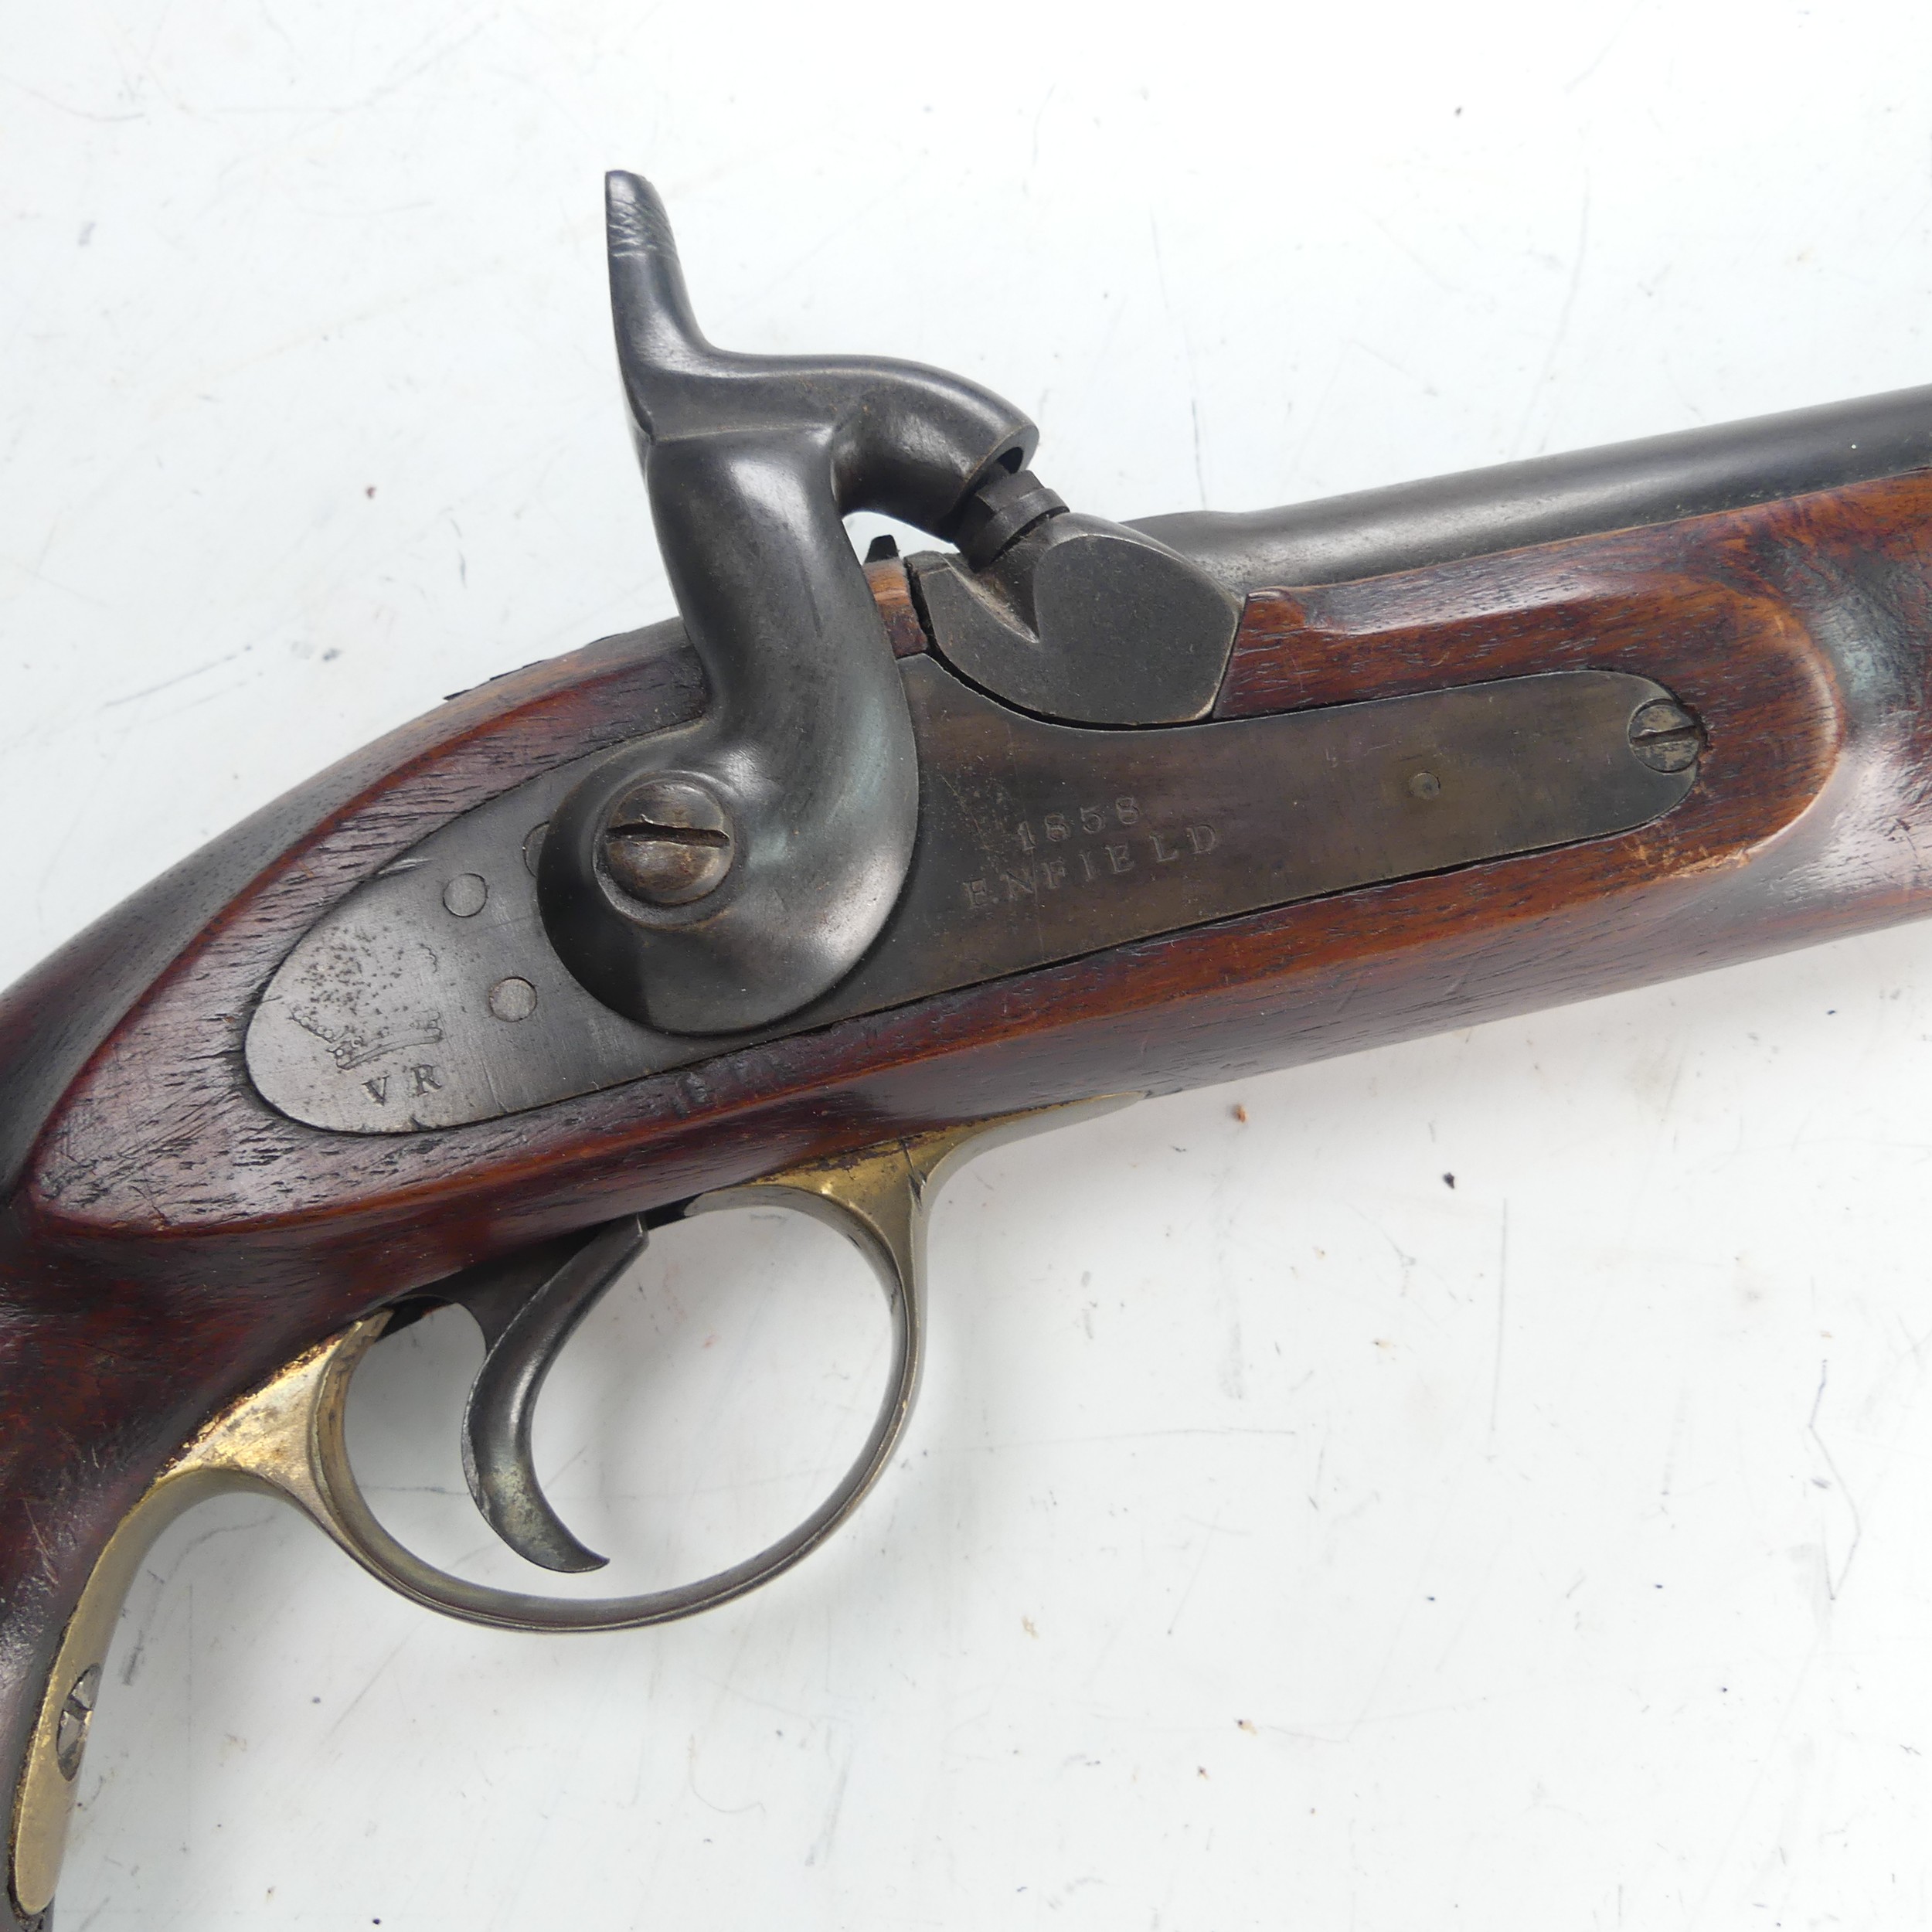 A 19th century 'Enfield' percussion cap service Pistol, with walnut stock, 8 inch steel barrel, - Image 6 of 7